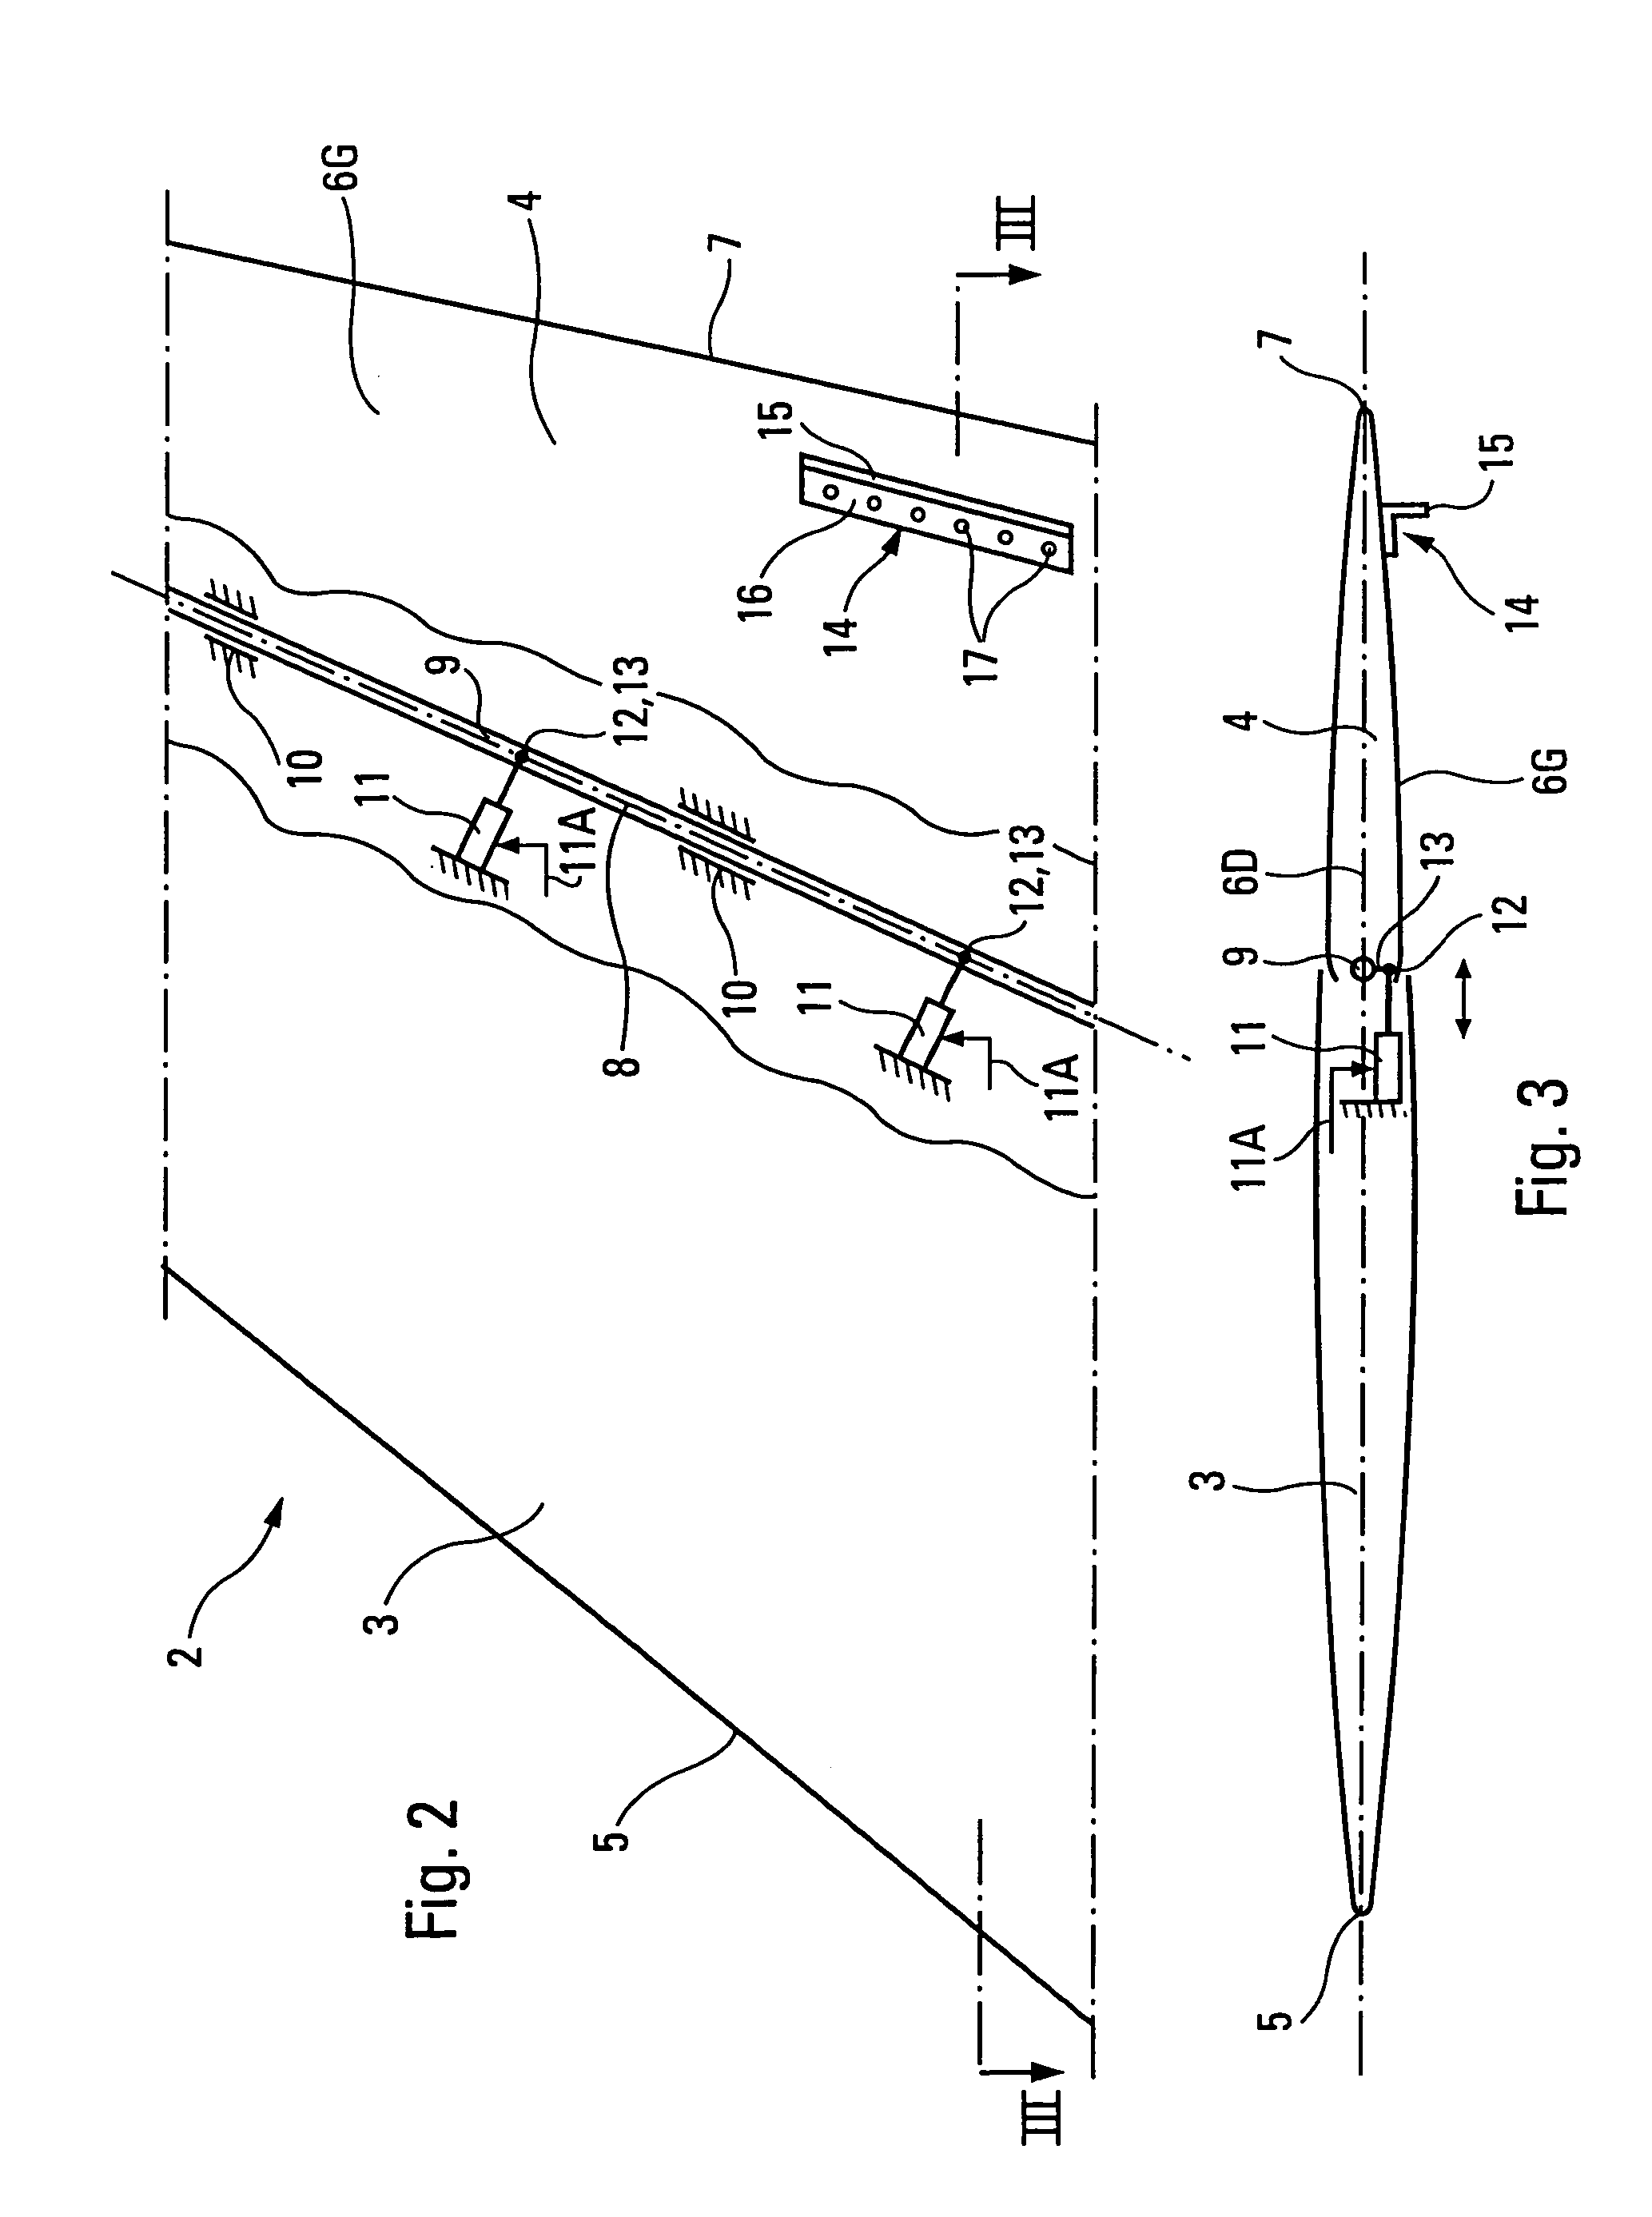 Method making it possible to prevent vibration of a rudder of an aircraft and aircraft using this method